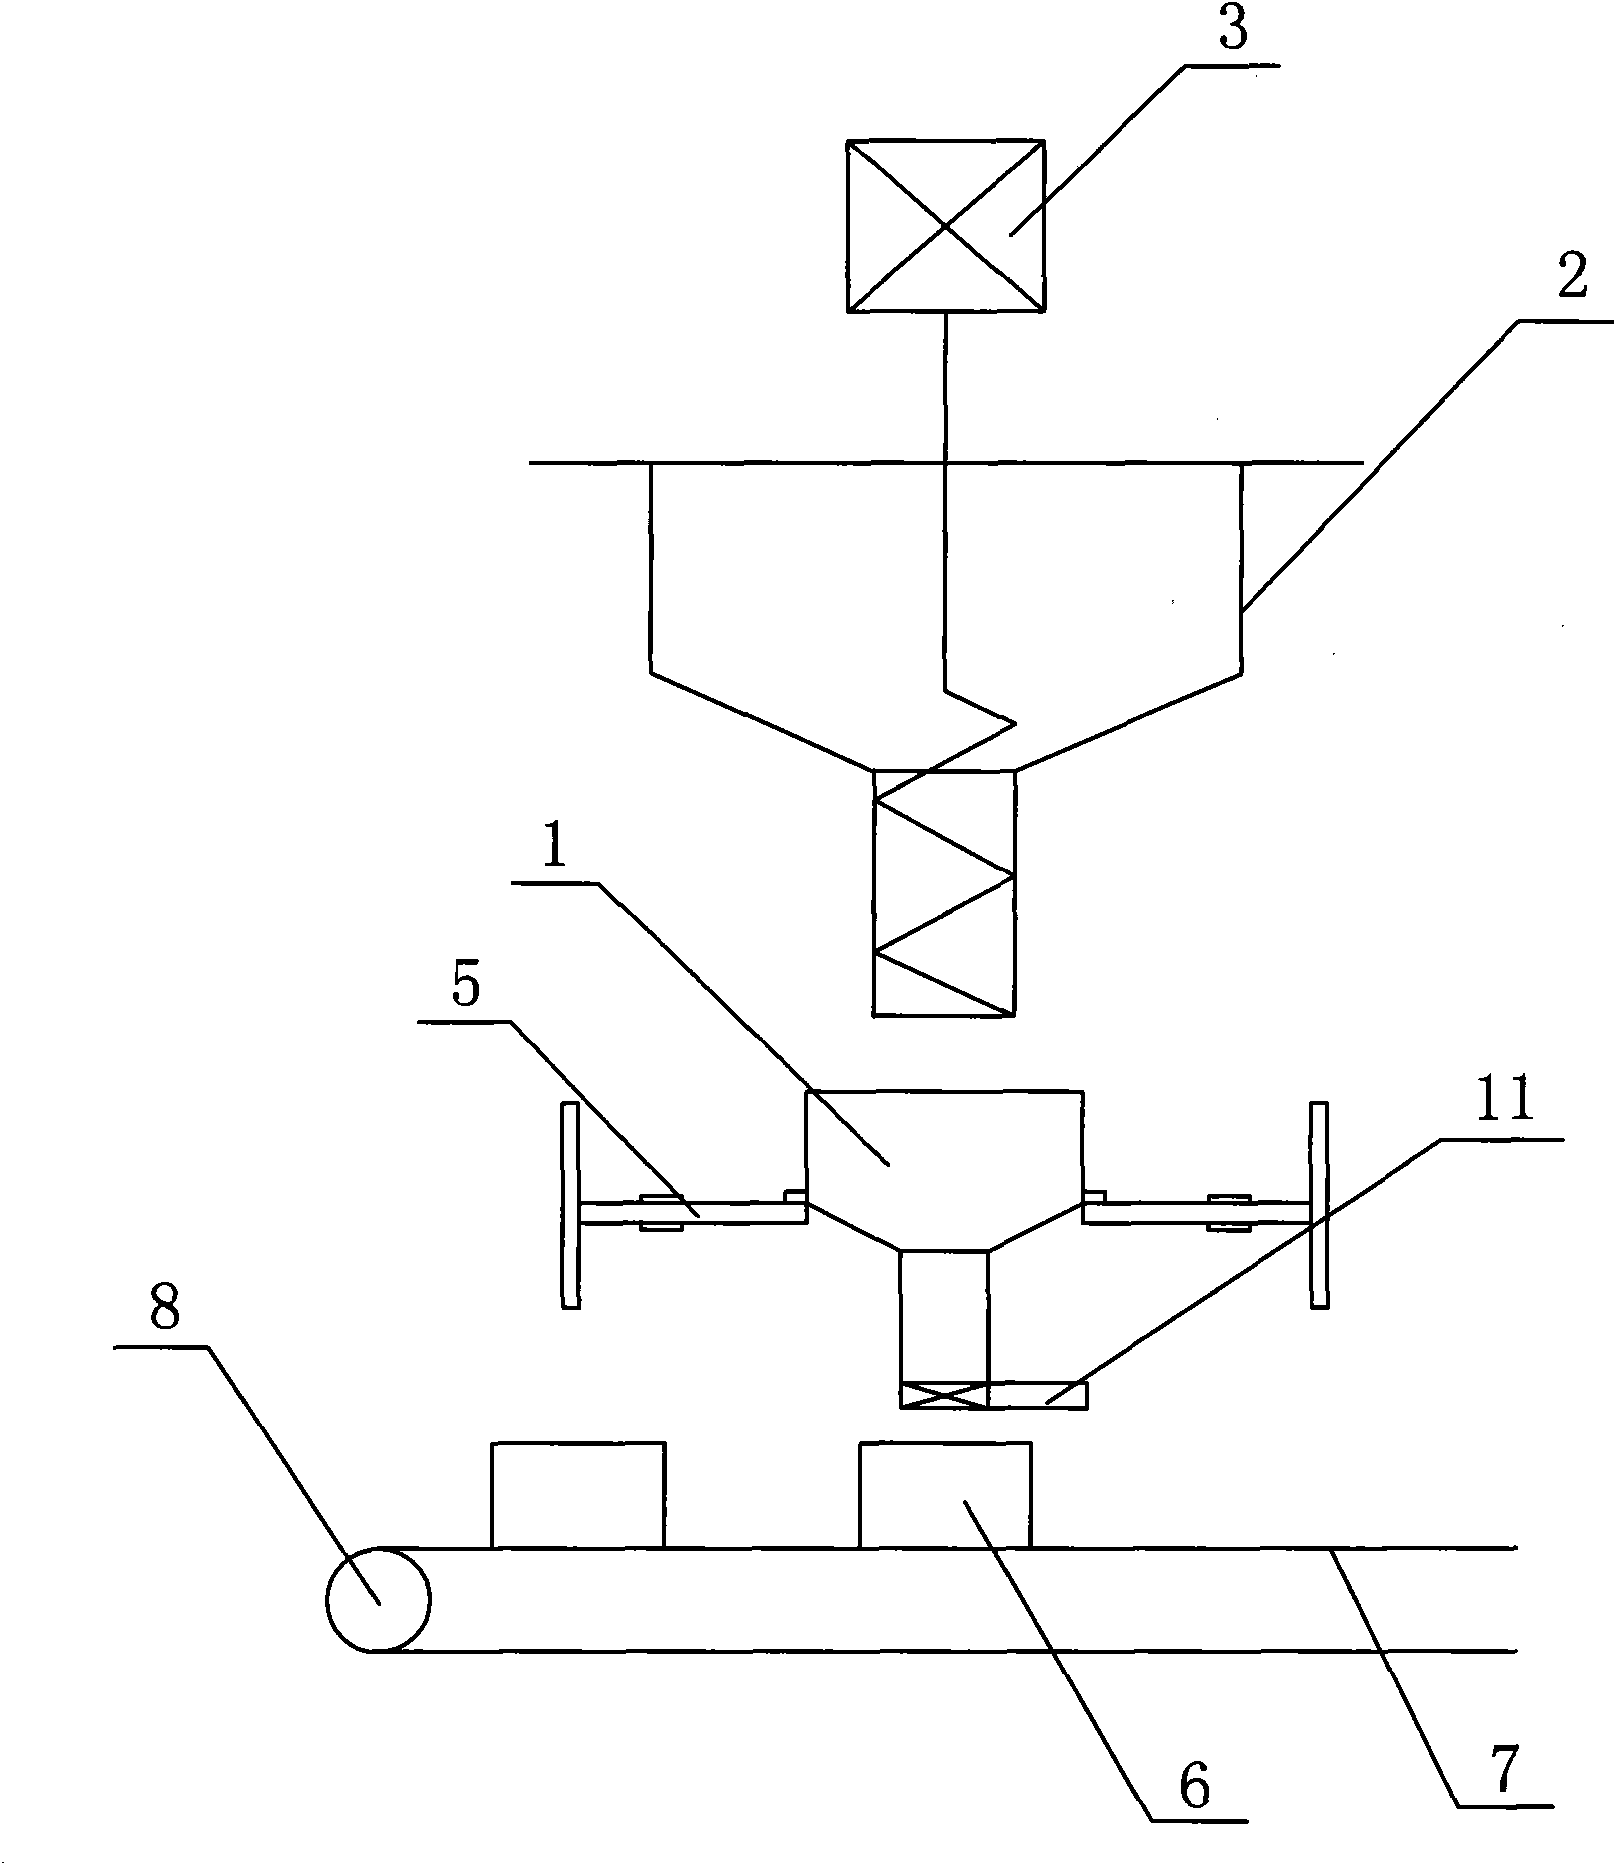 Control method for automatic weighting of metal powder